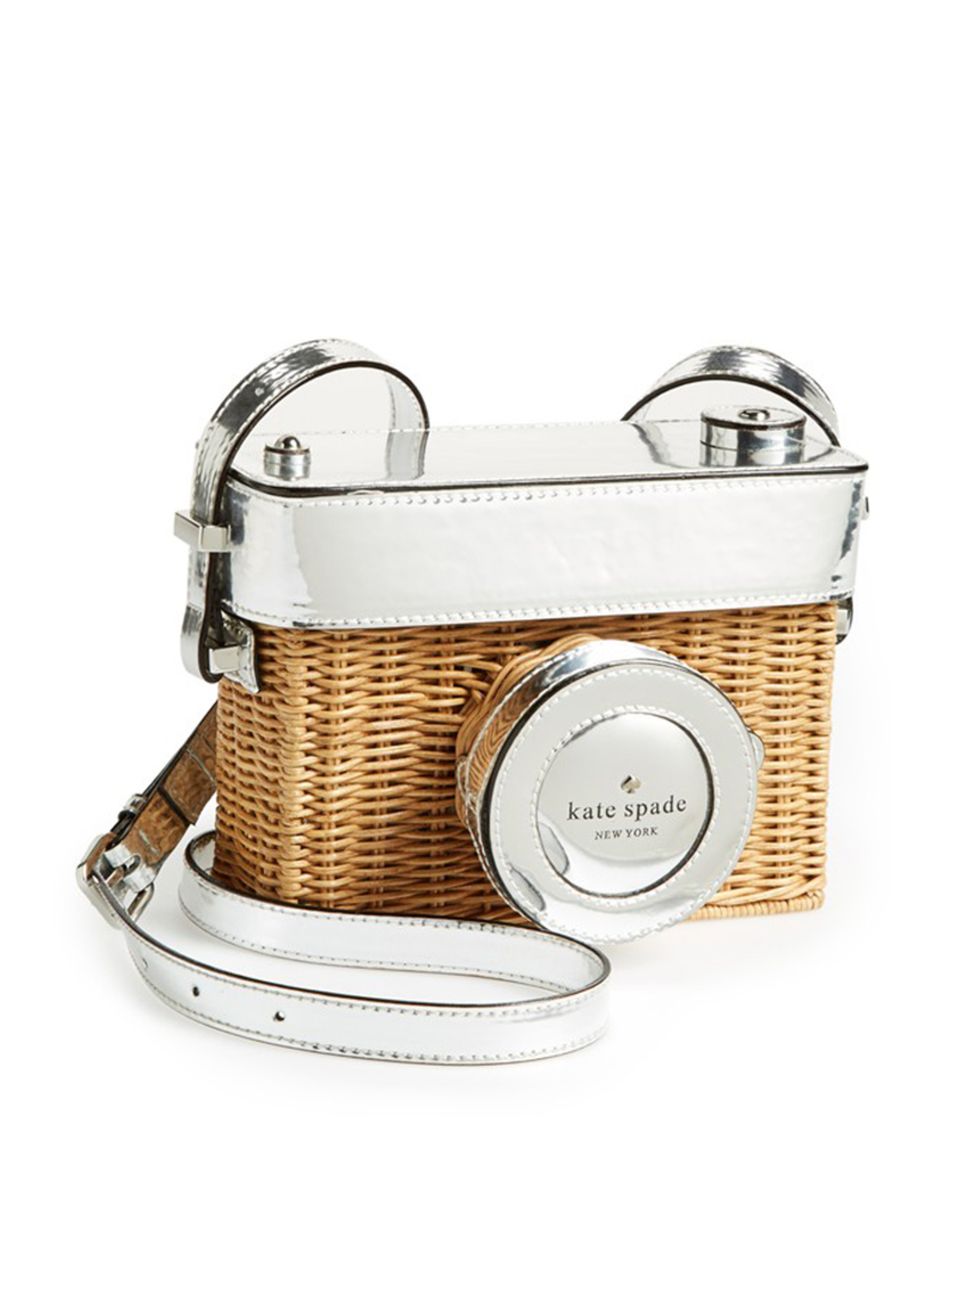 <p>Say cheese! Mix in some playful accessories.</p><p>Bag by <a href="http://www.katespade.com/grand-tour-wicker-camera/PXRU4748,en_US,pd.html">Kate Spade</a>, £179</p>